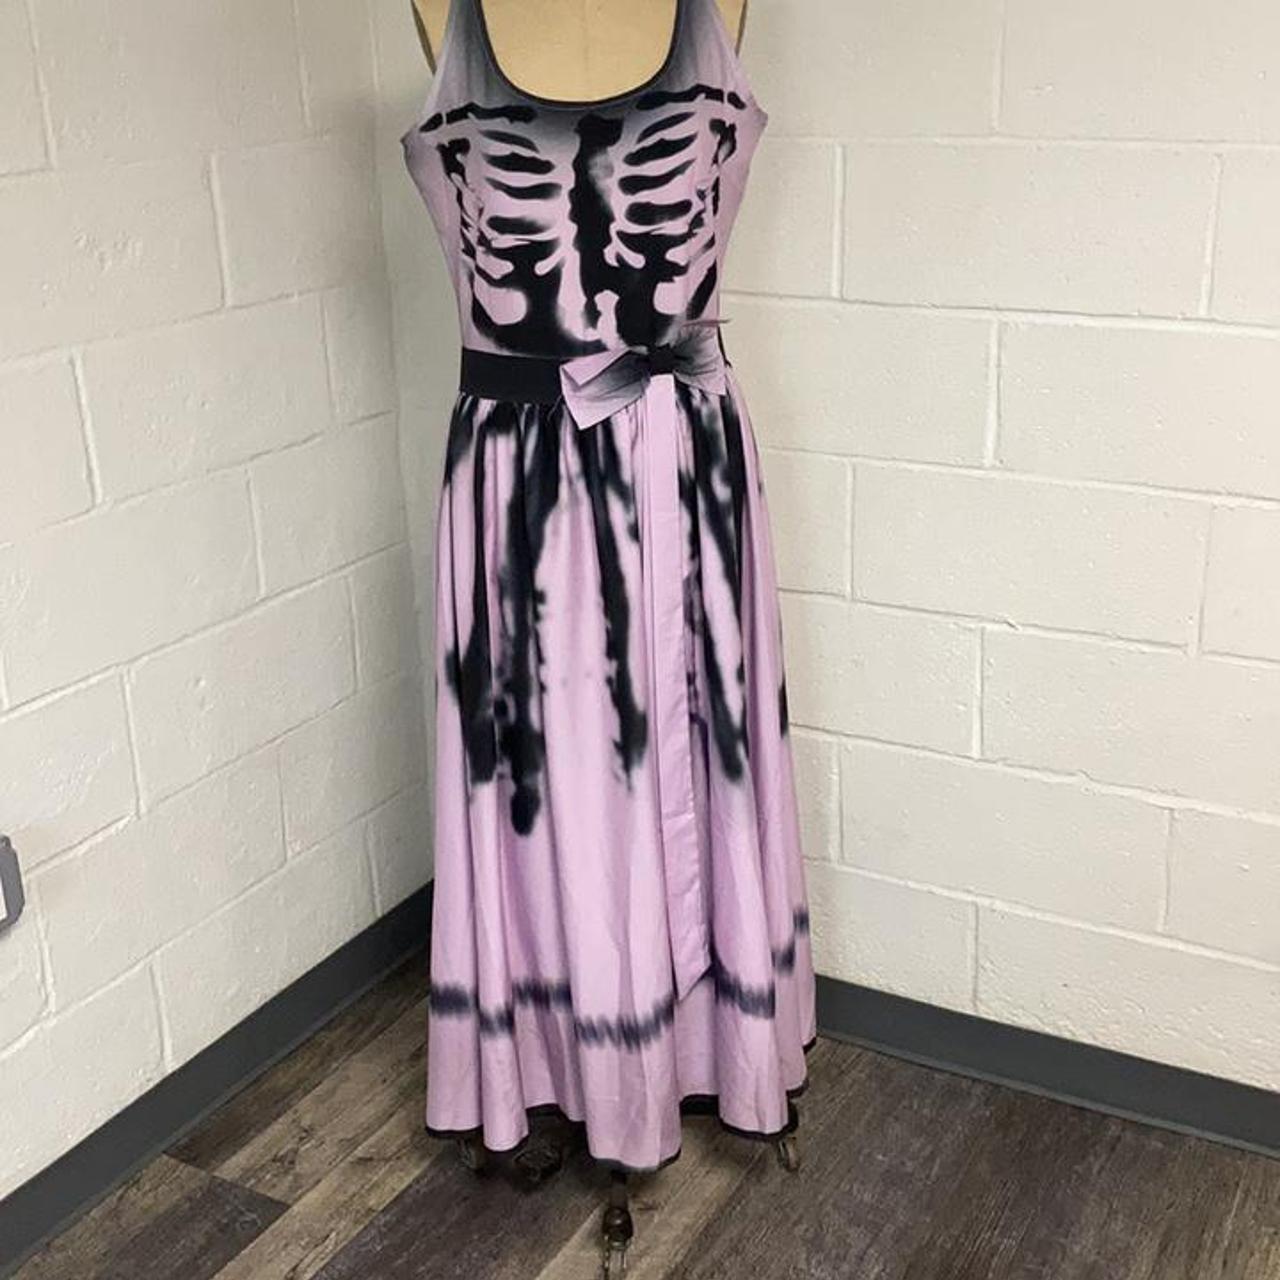 Women's Black and Pink Dress